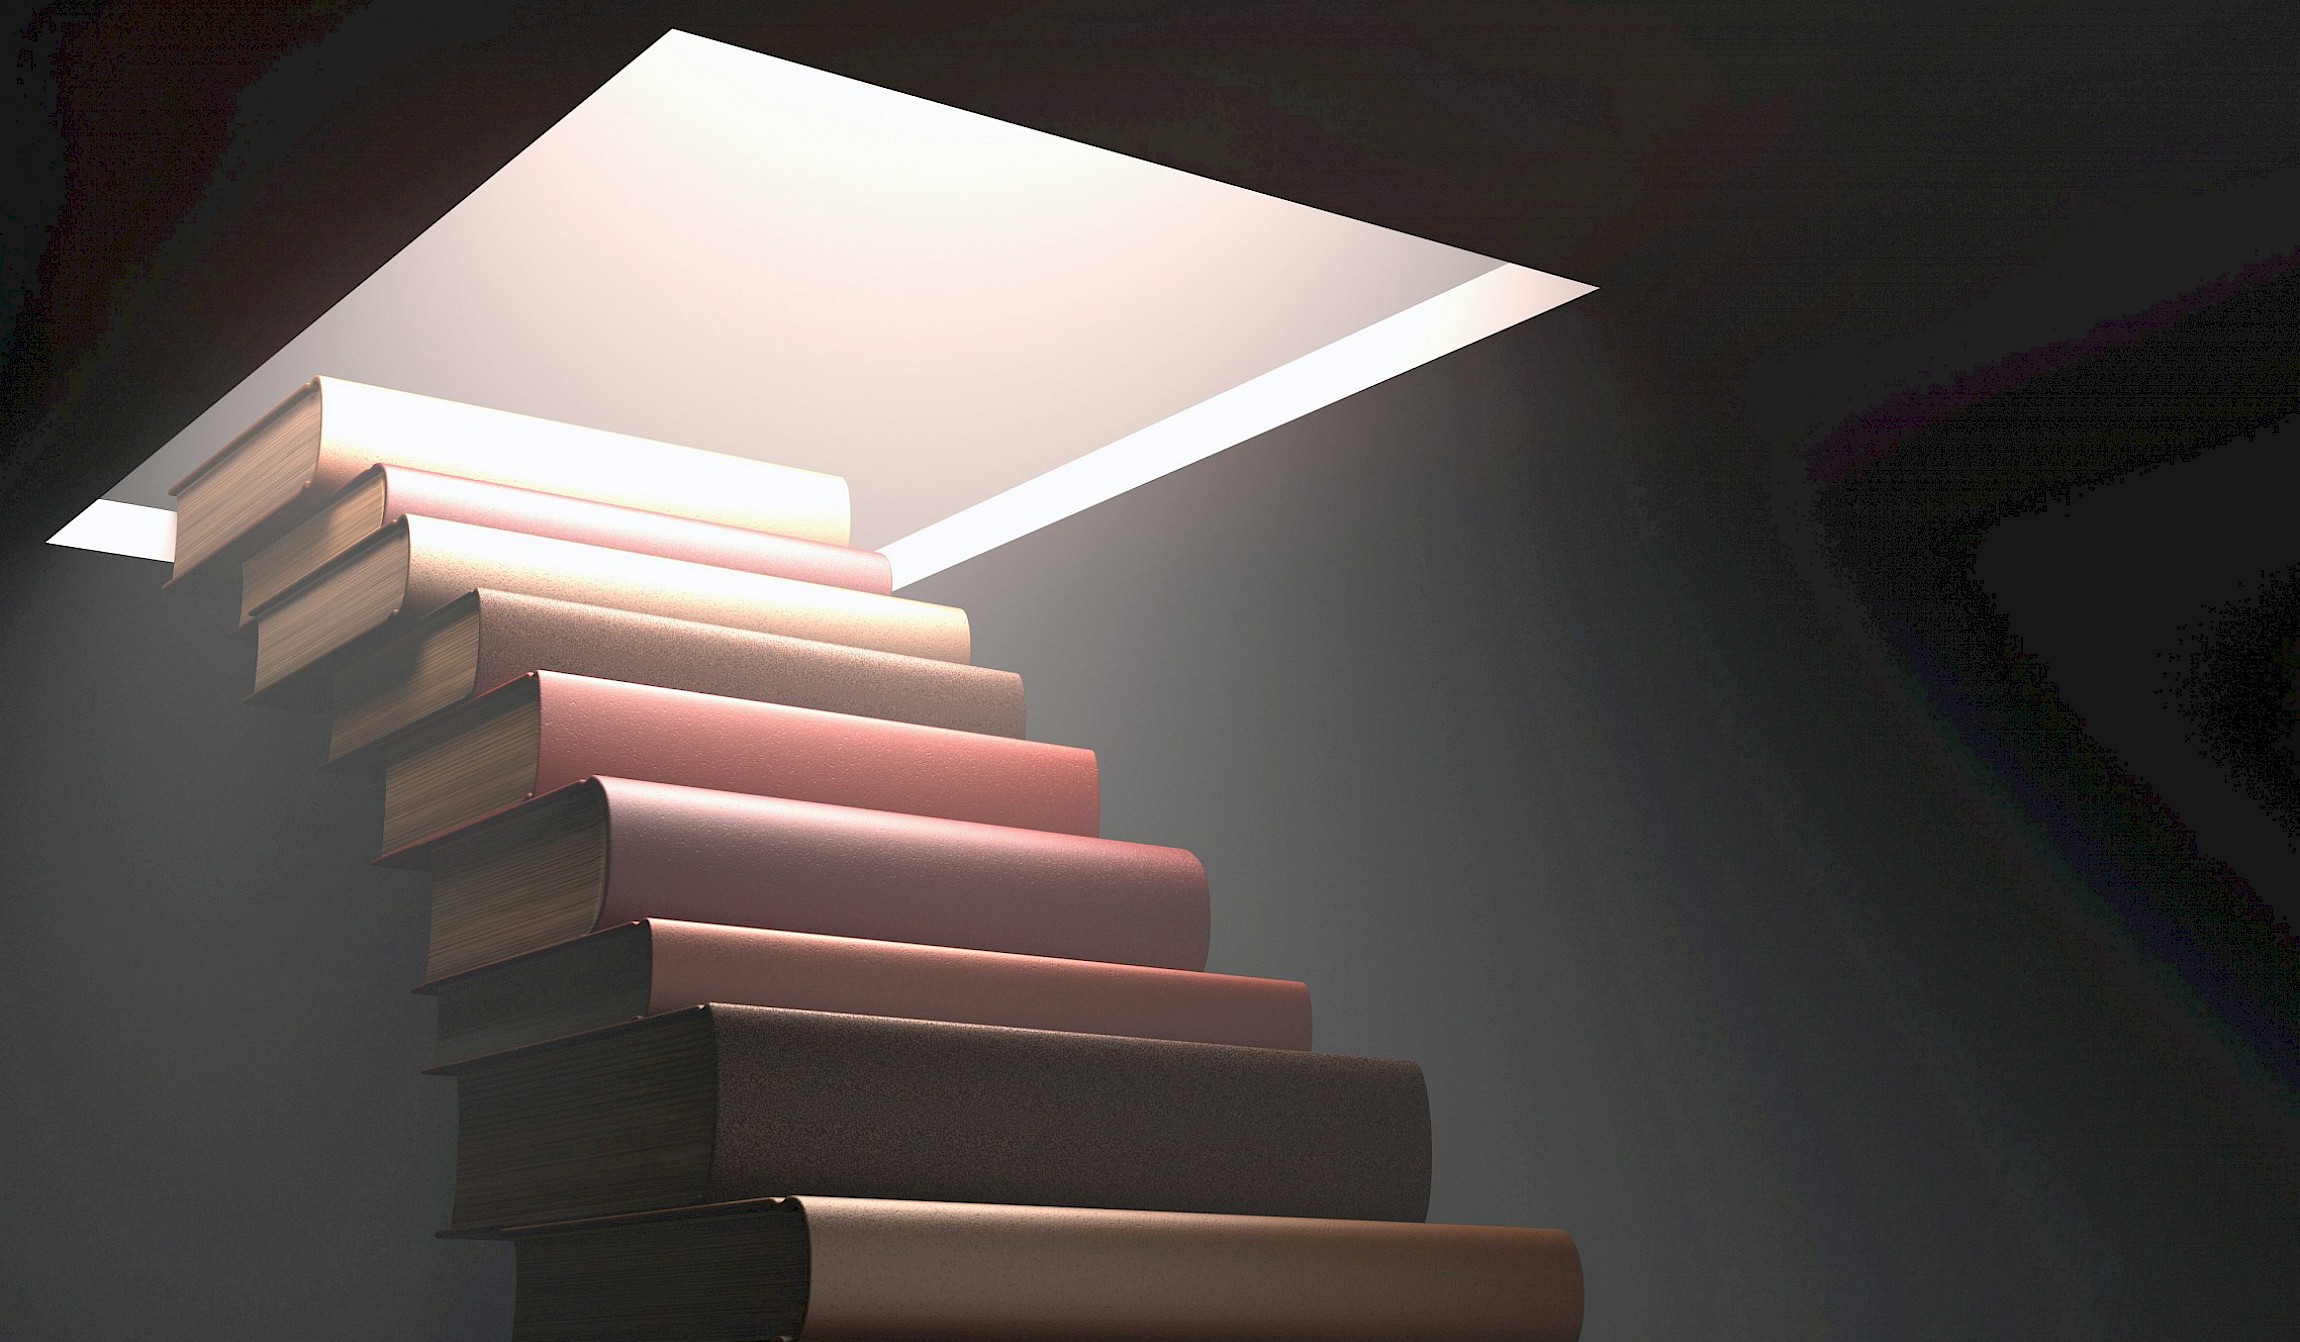 A pile of books that resembles stairs going to an open hatch in the ceiling